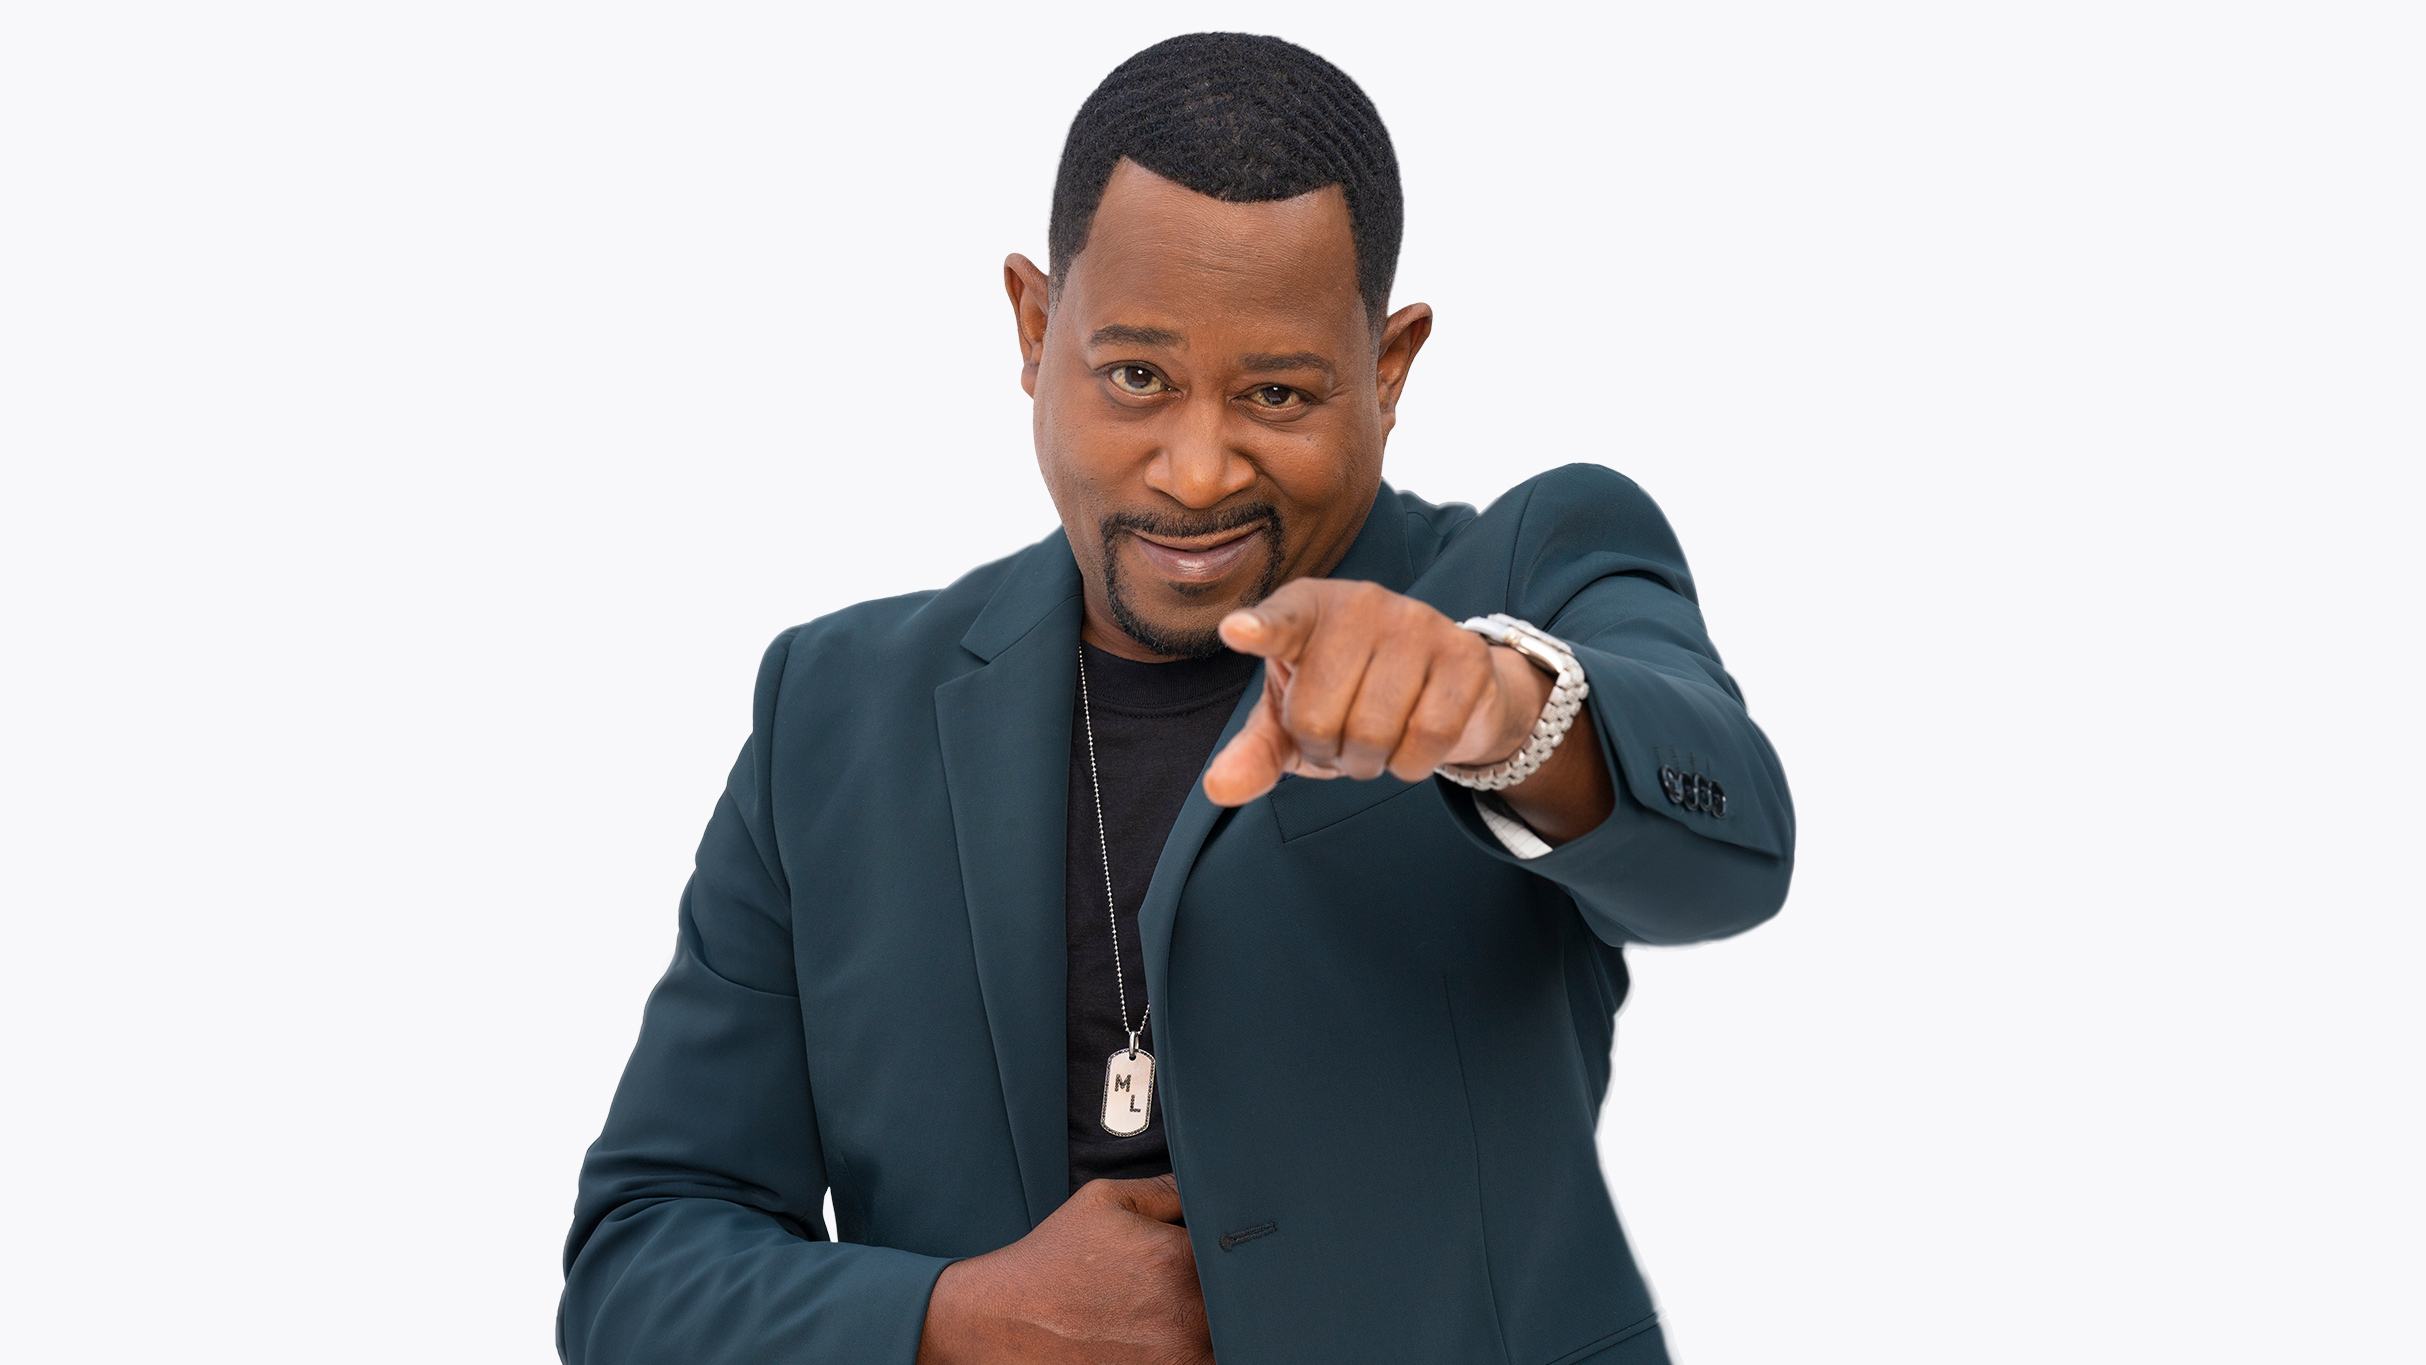 Martin Lawrence with special guests Adele Givens & Gary Owen